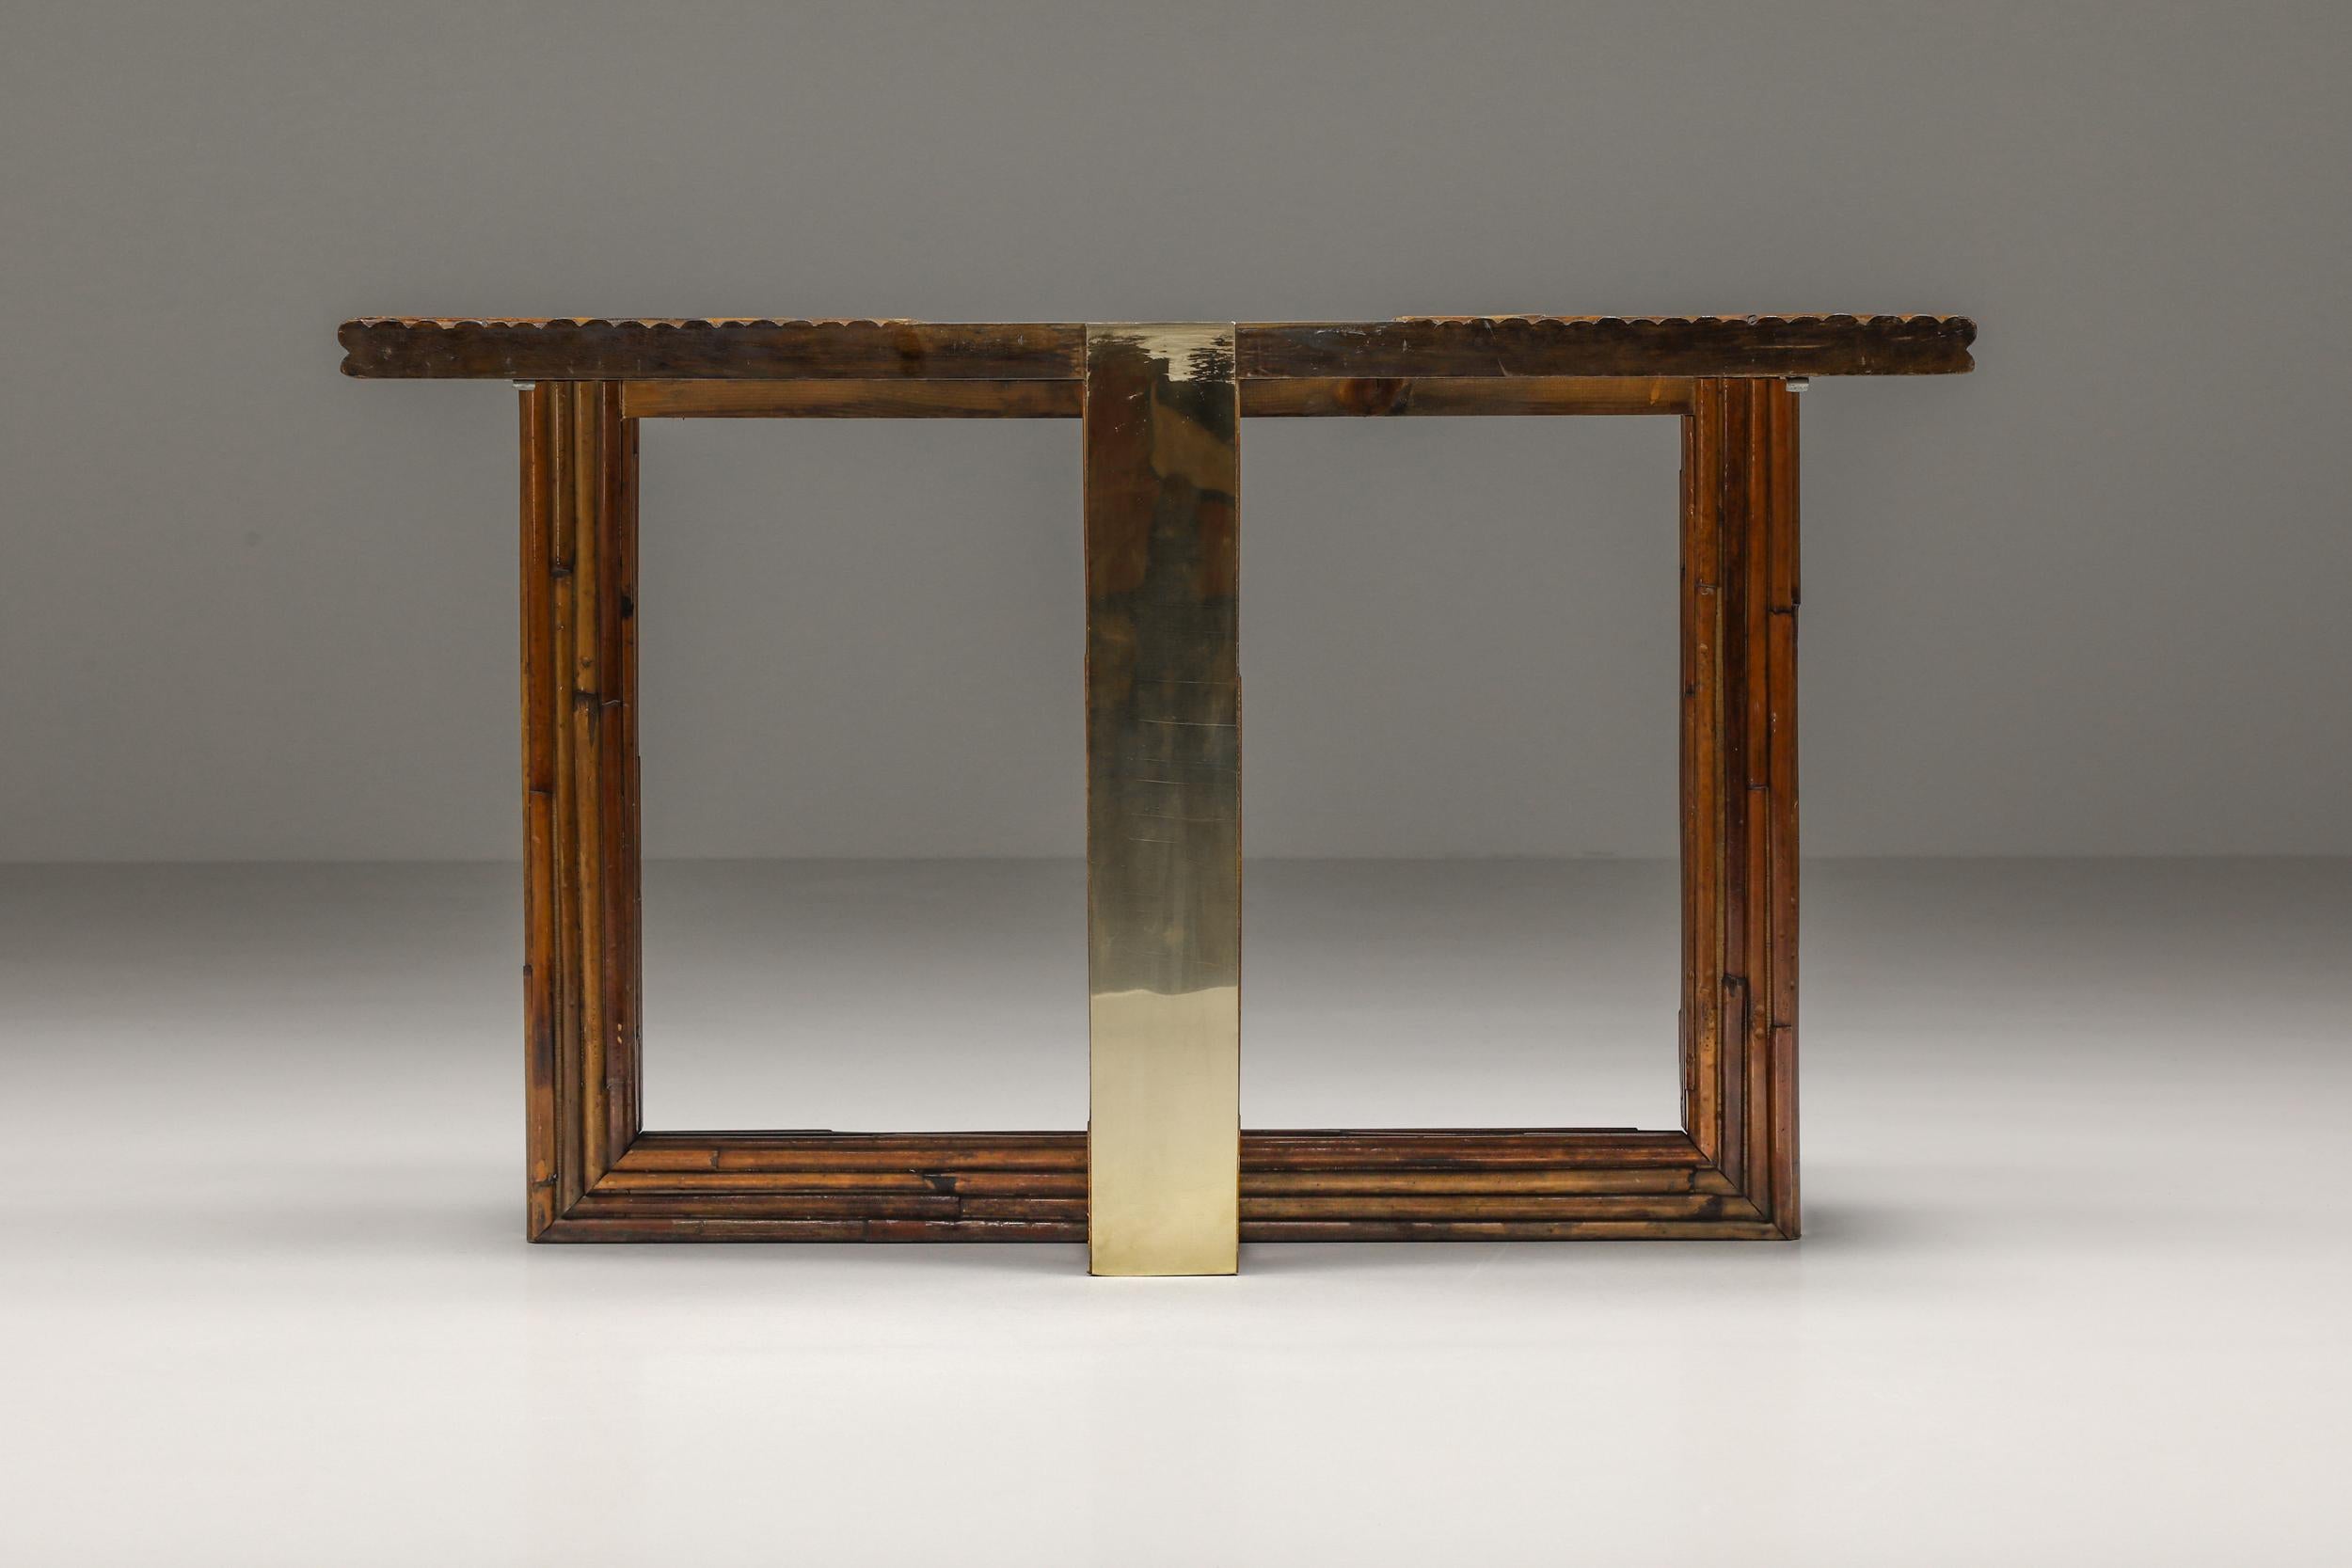 French Vivai del Sud Console Table Crespi Style, Bamboo & Brass, Post-Modern 1960's